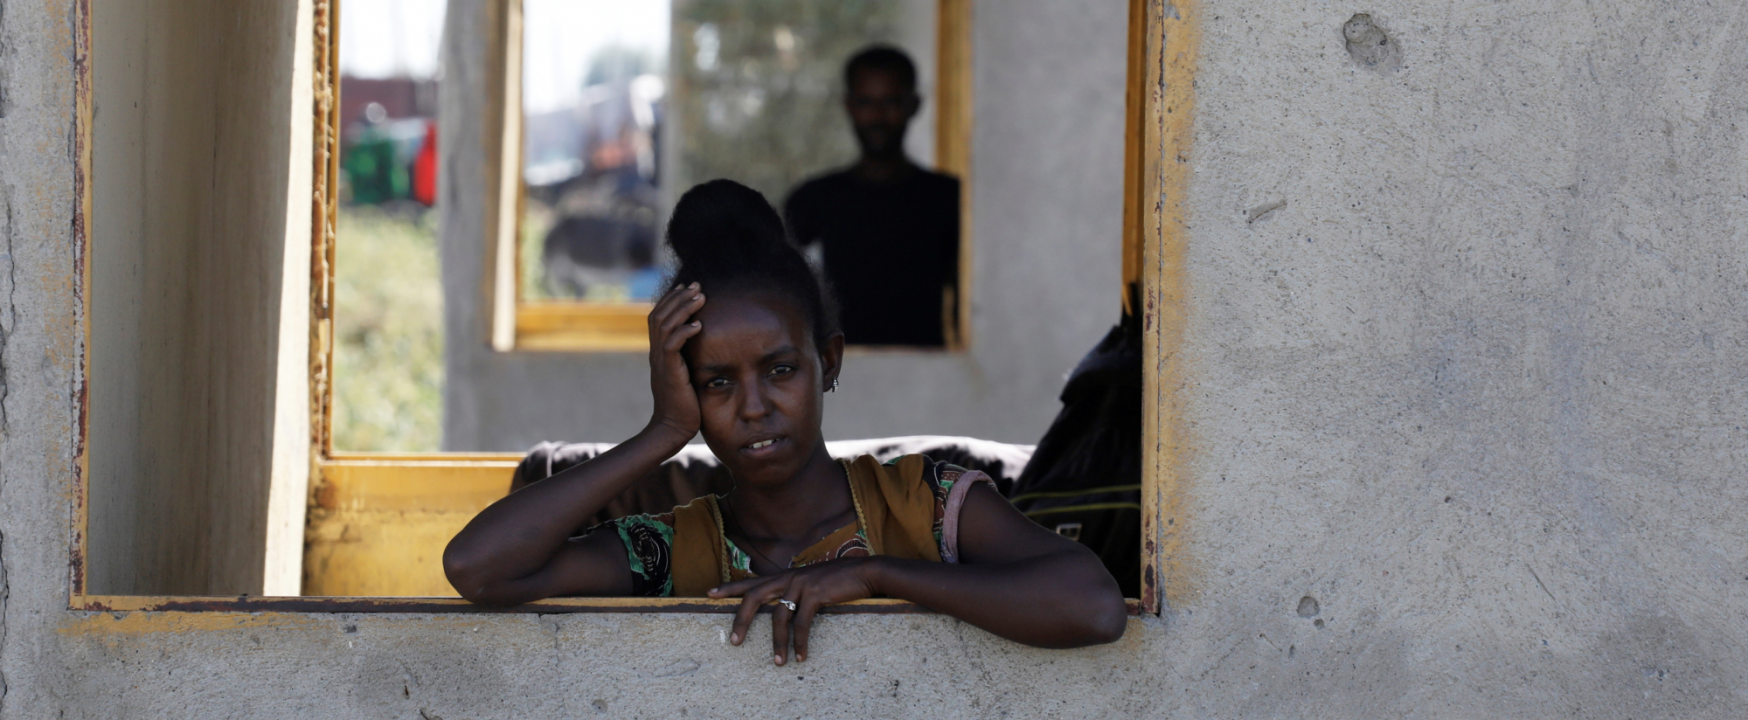 An Ethiopian woman stands at a window of a temporary shelter at the Village 8 refugee transit camp in Sudan, which houses refugees fleeing the fighting in Ethiopia’s Tigray region, December 2, 2020. 